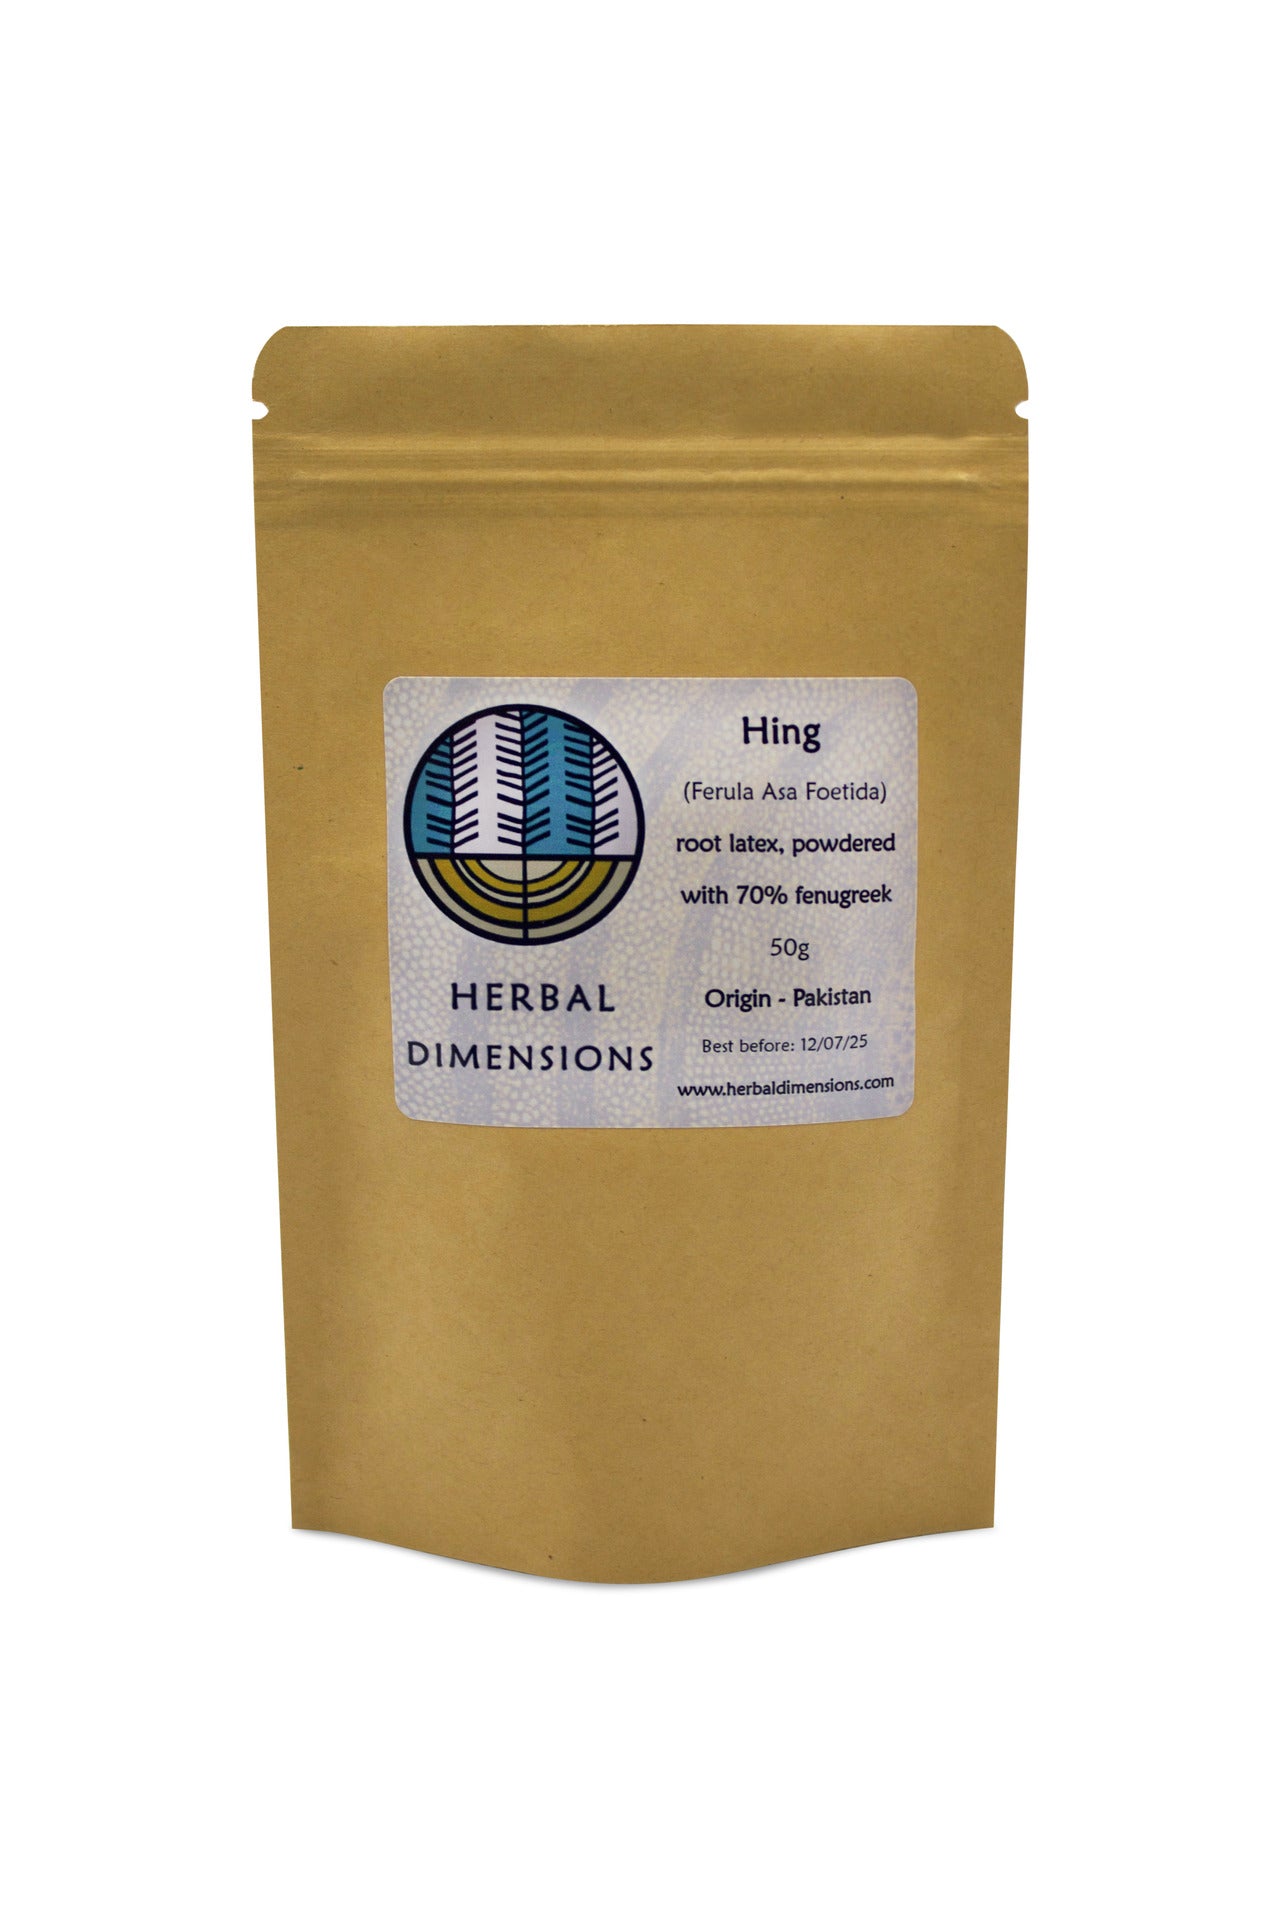 A packet of Hing with a Herbal Dimensions logo